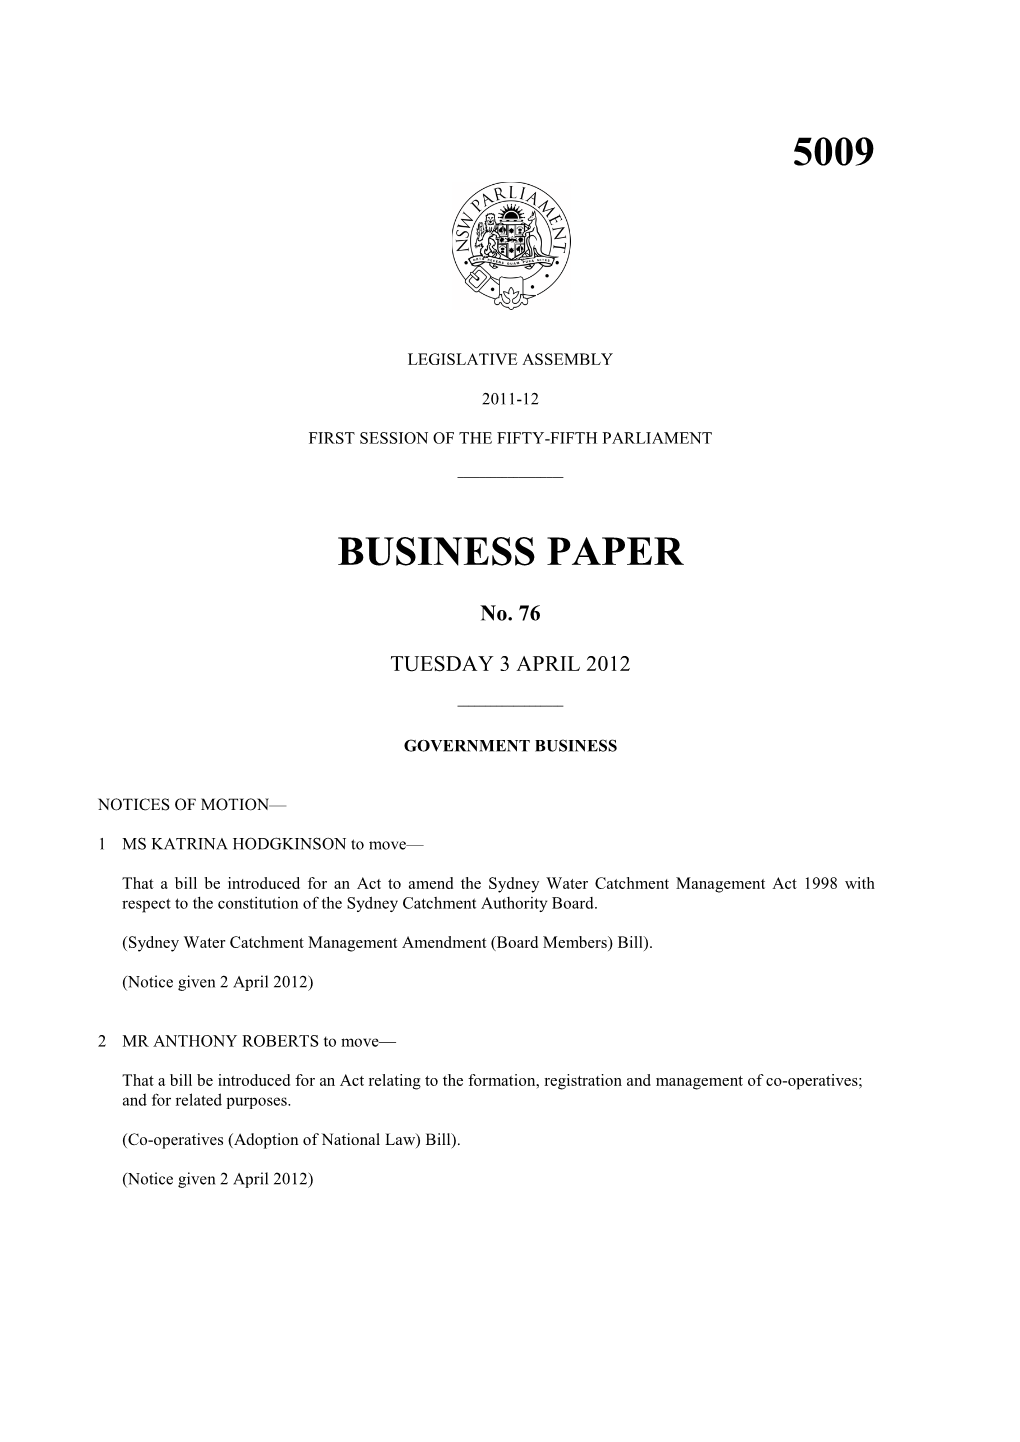 5009 Business Paper